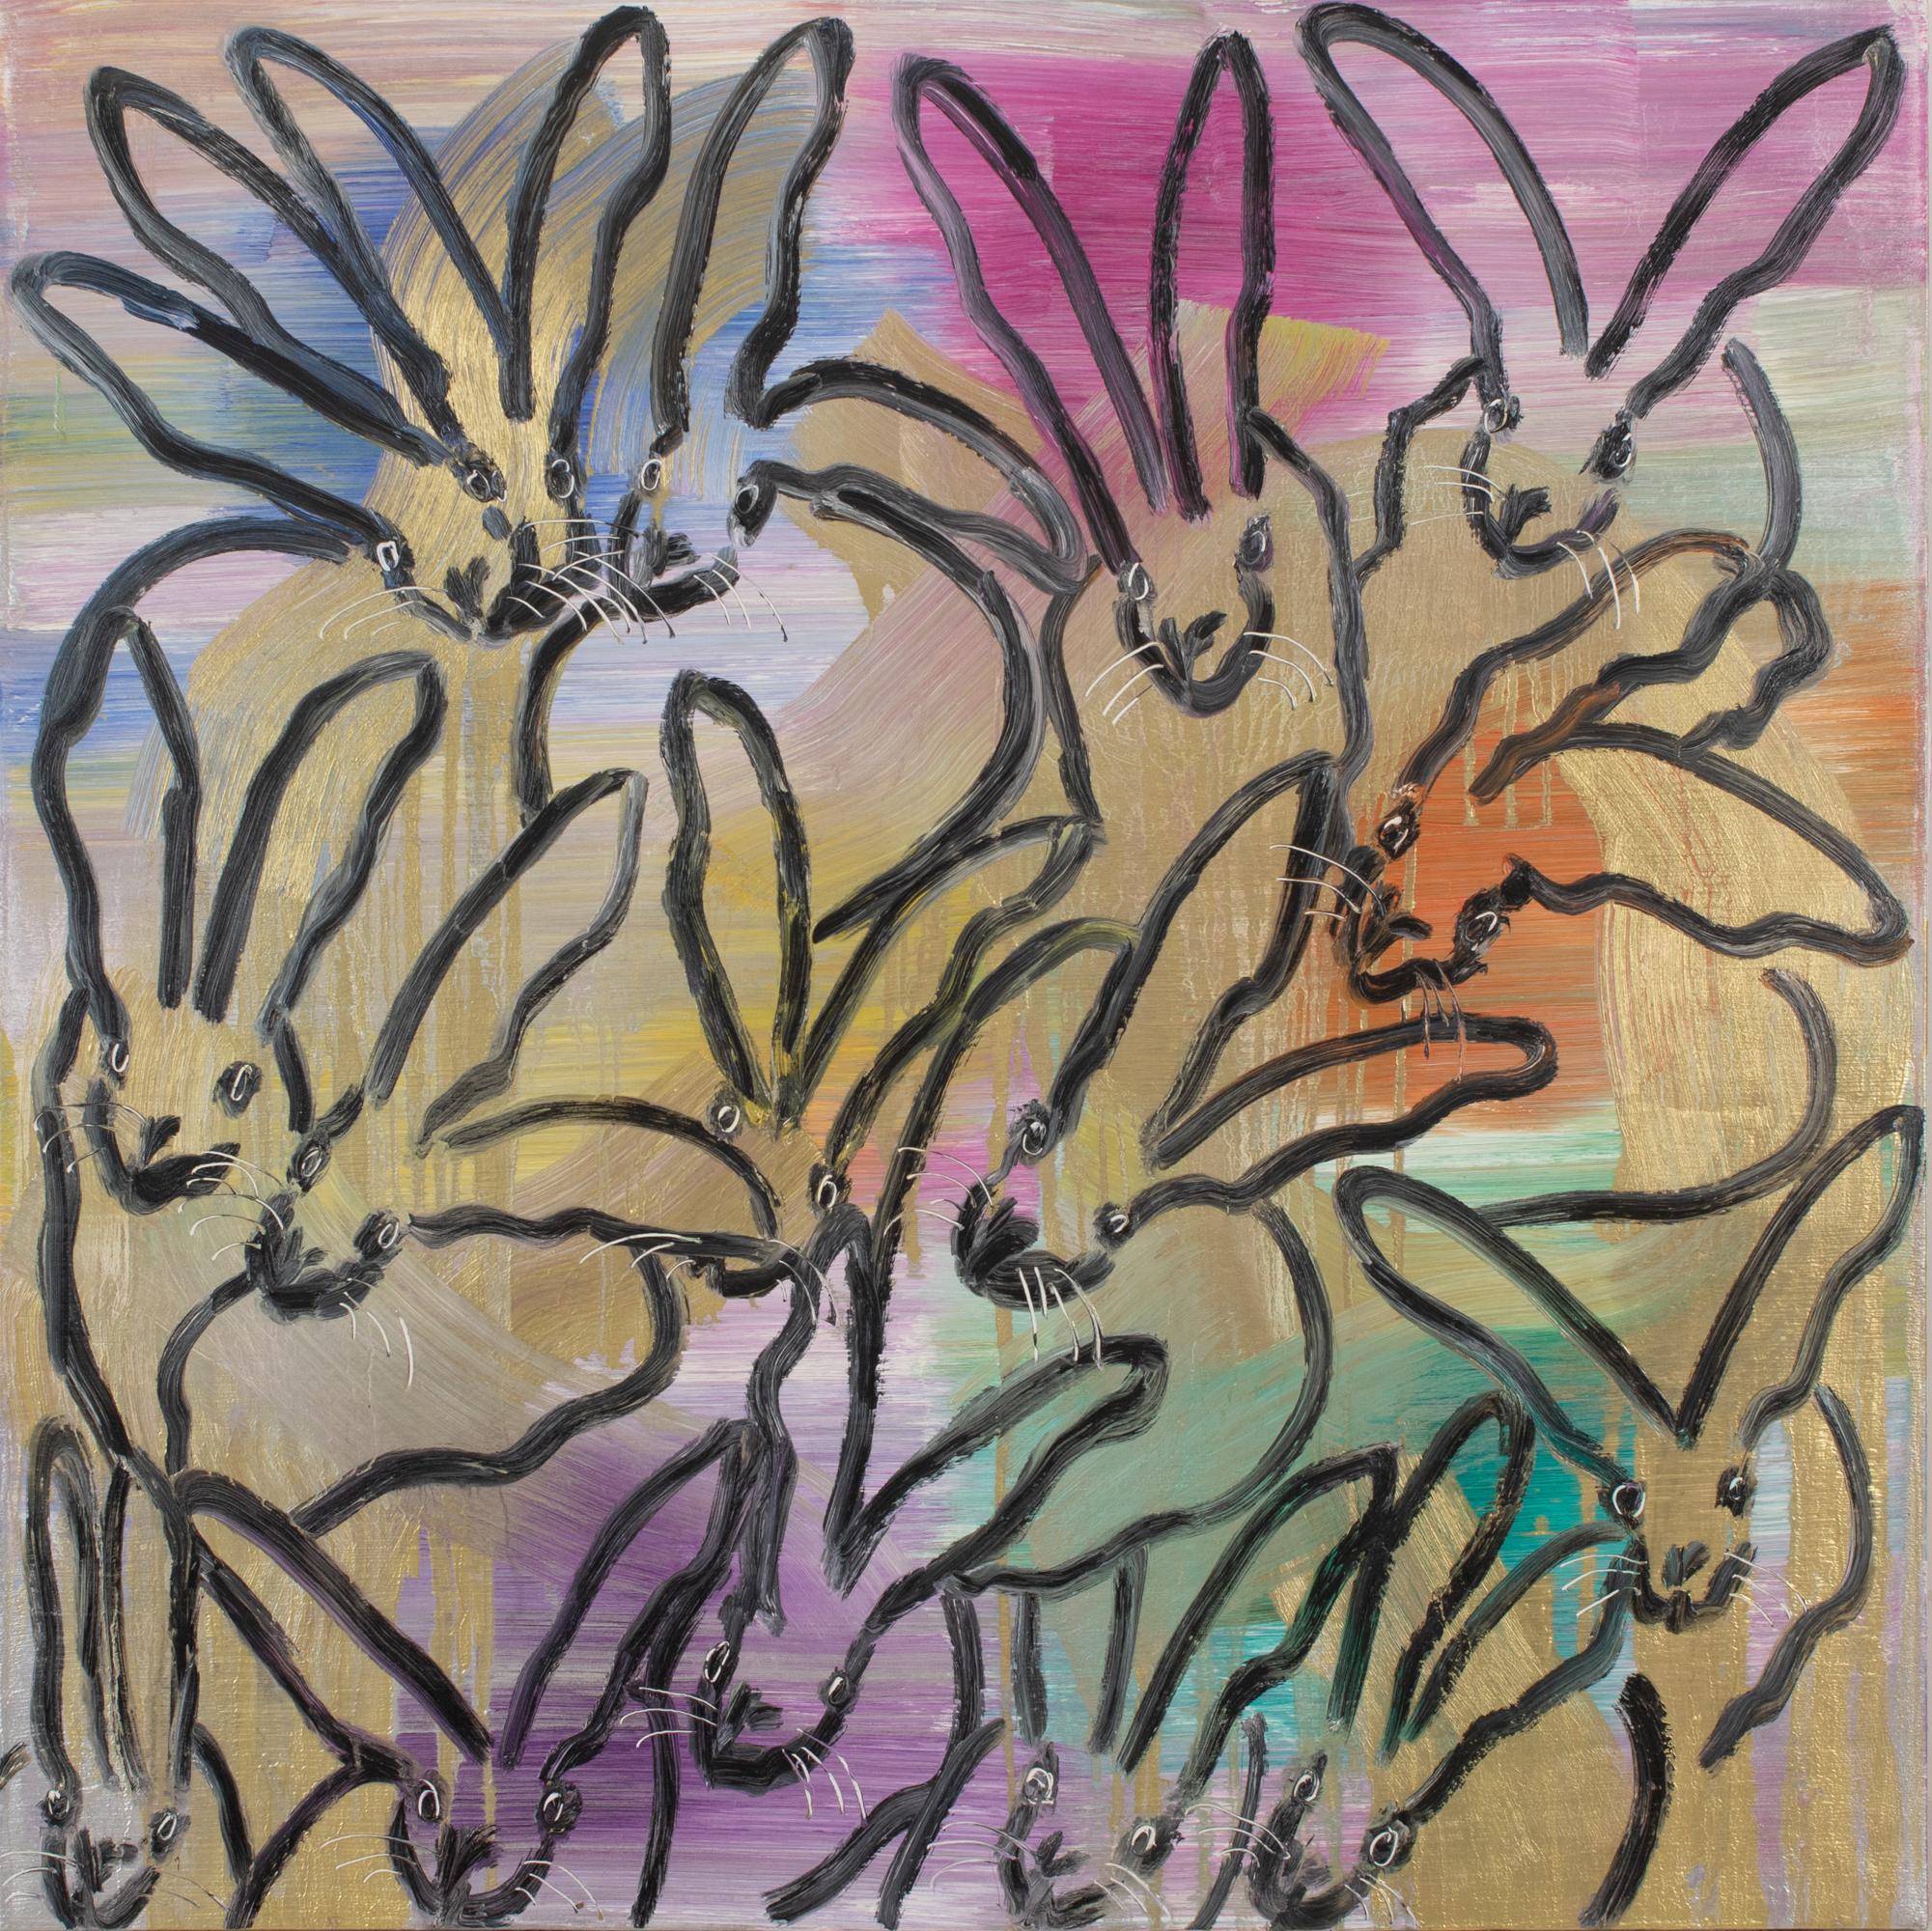 Hunt Slonem "Chinensis Curiosity" Multicolor Metallic Bunnies
Black gestured bunnies on multicolored metallic background.

Oil on Canvas

Unframed: 48 x 48 in.

Hunt Slonem is a well-renowned American artist is known for his neo-expressionist